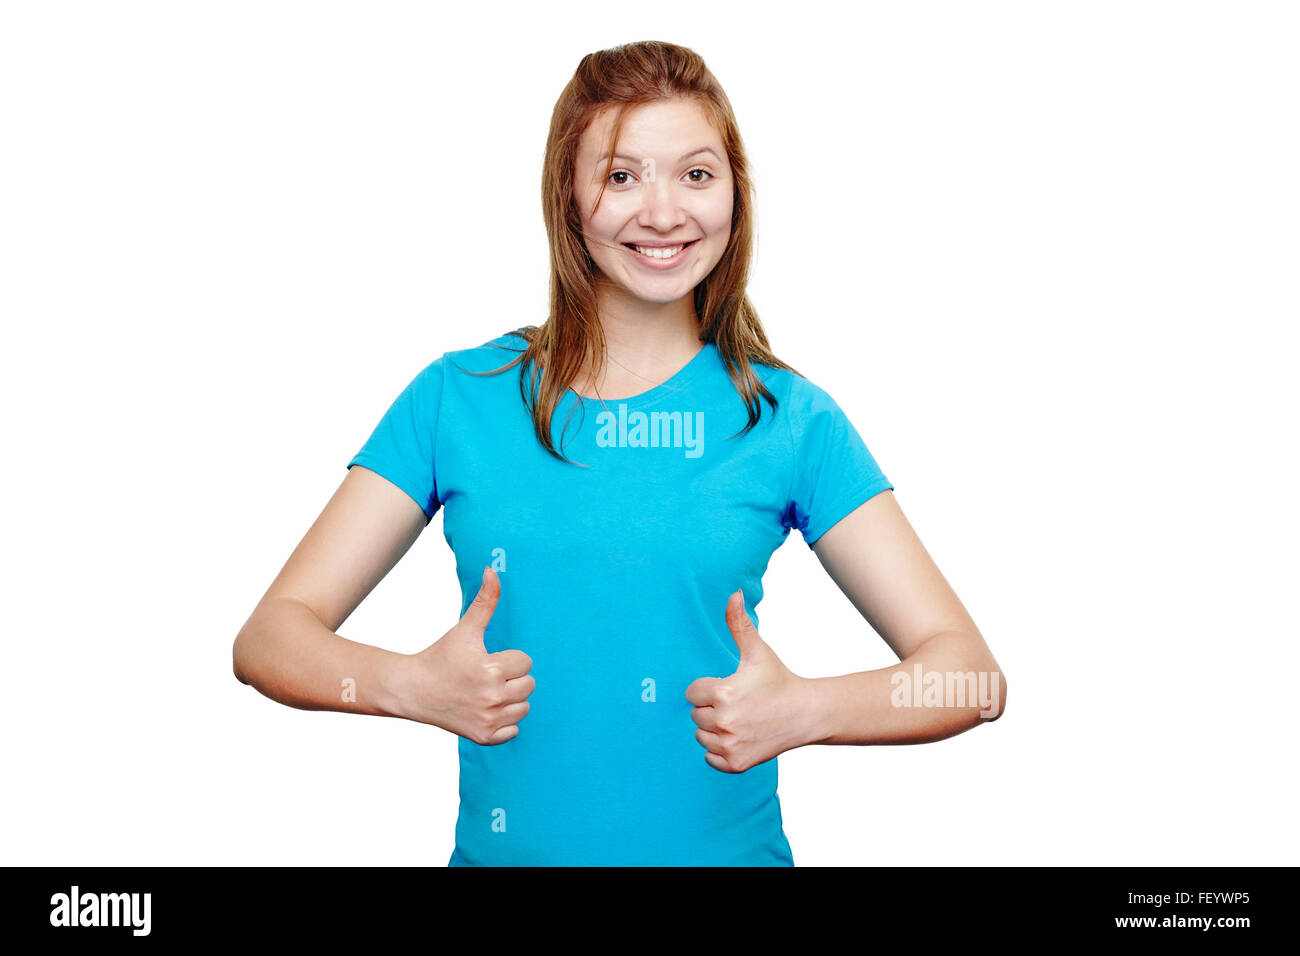 Smiling young woman showing thumbs up Stock Photo